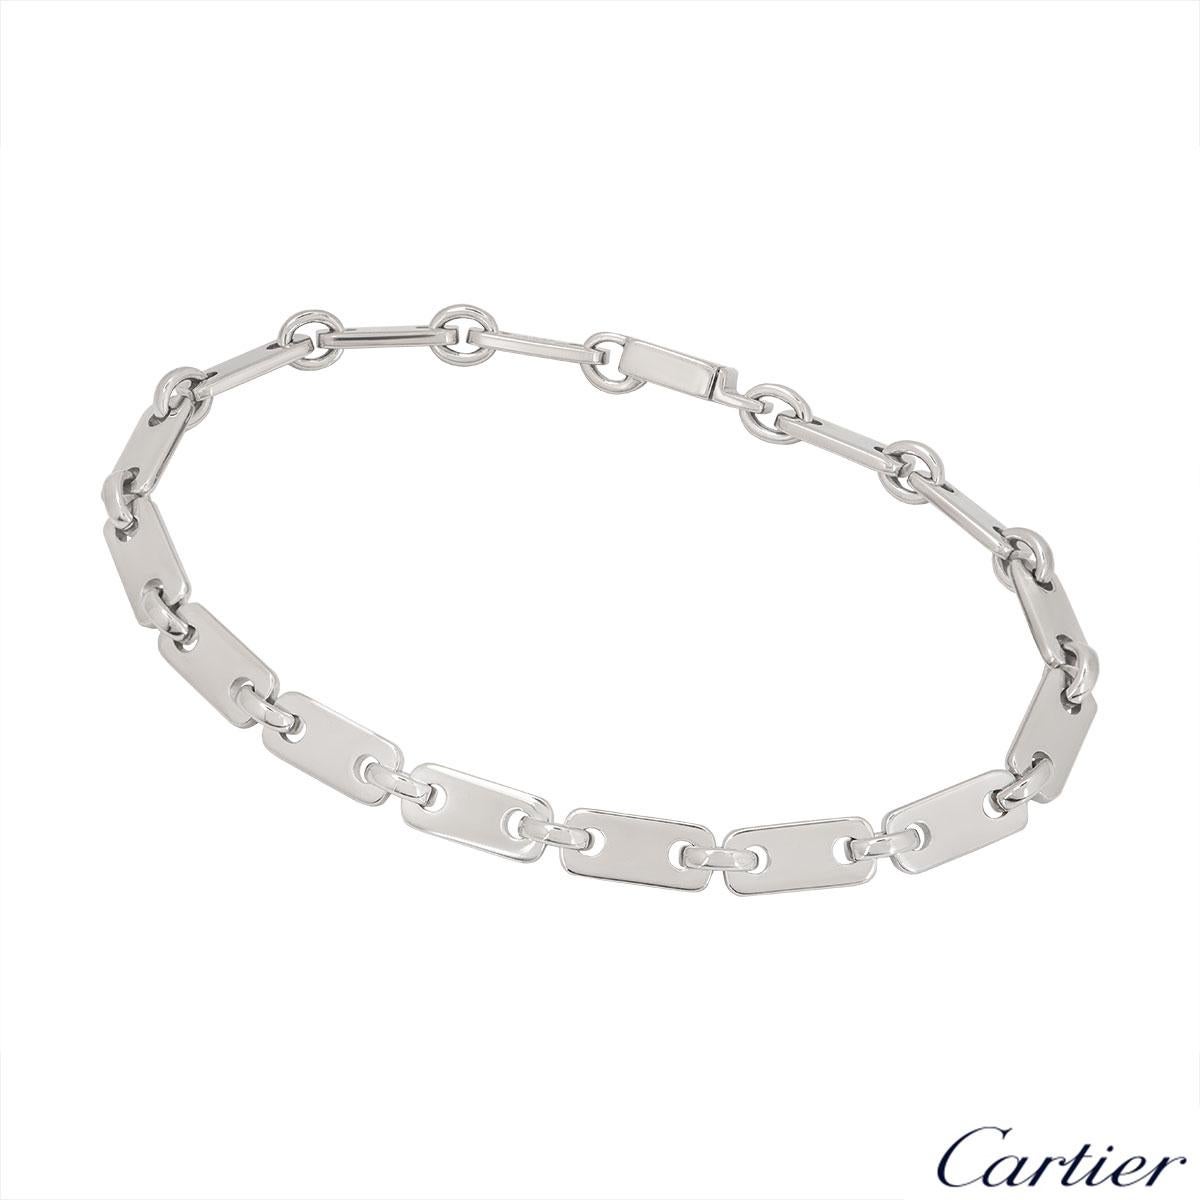 An elegant 18k white gold rectangular link bracelet by Cartier. The bracelet comprises 15 rectangular plain pierced links and alternating between each link is a round circular link. The bracelet measures 7.5 inches in length and features a open